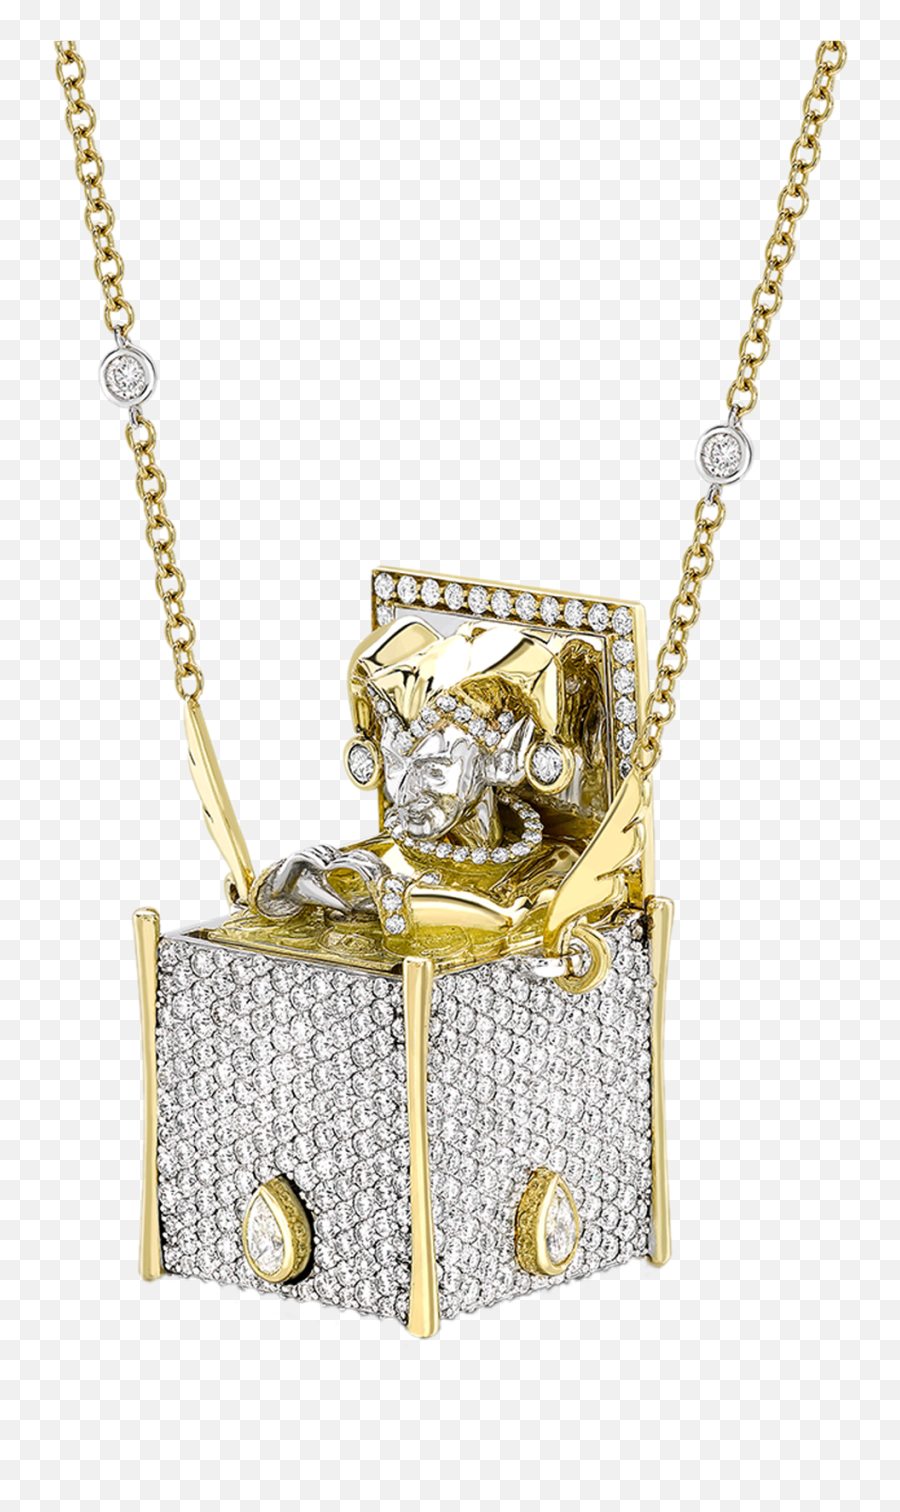 Jack In The Box Necklace Jbr12 Emoji,Jack In The Box Png